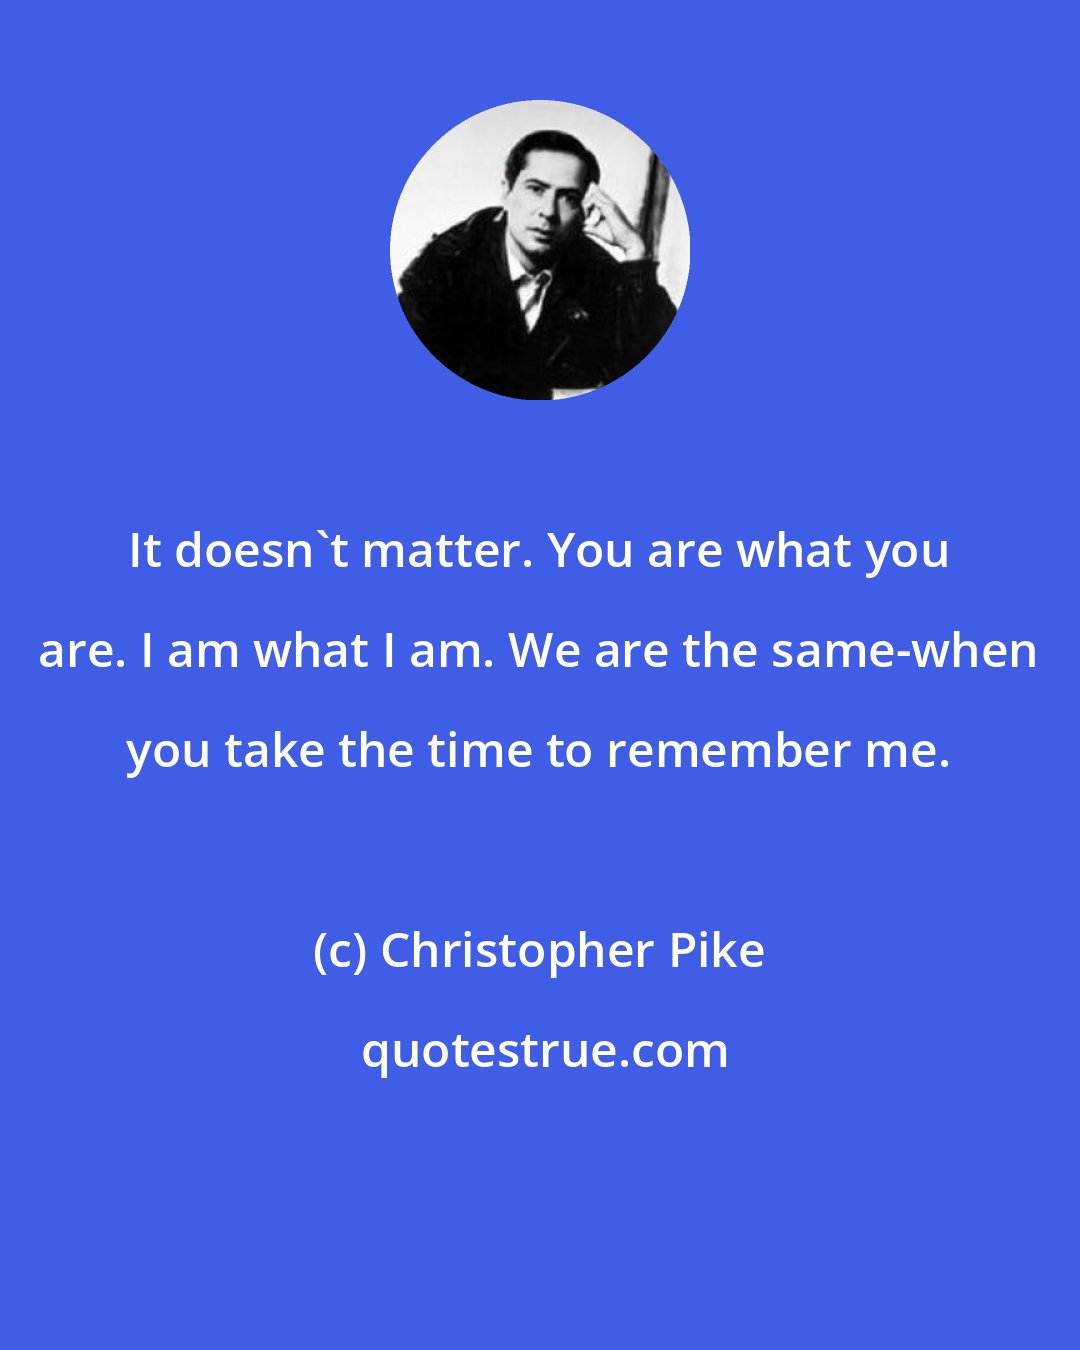 Christopher Pike: It doesn't matter. You are what you are. I am what I am. We are the same-when you take the time to remember me.